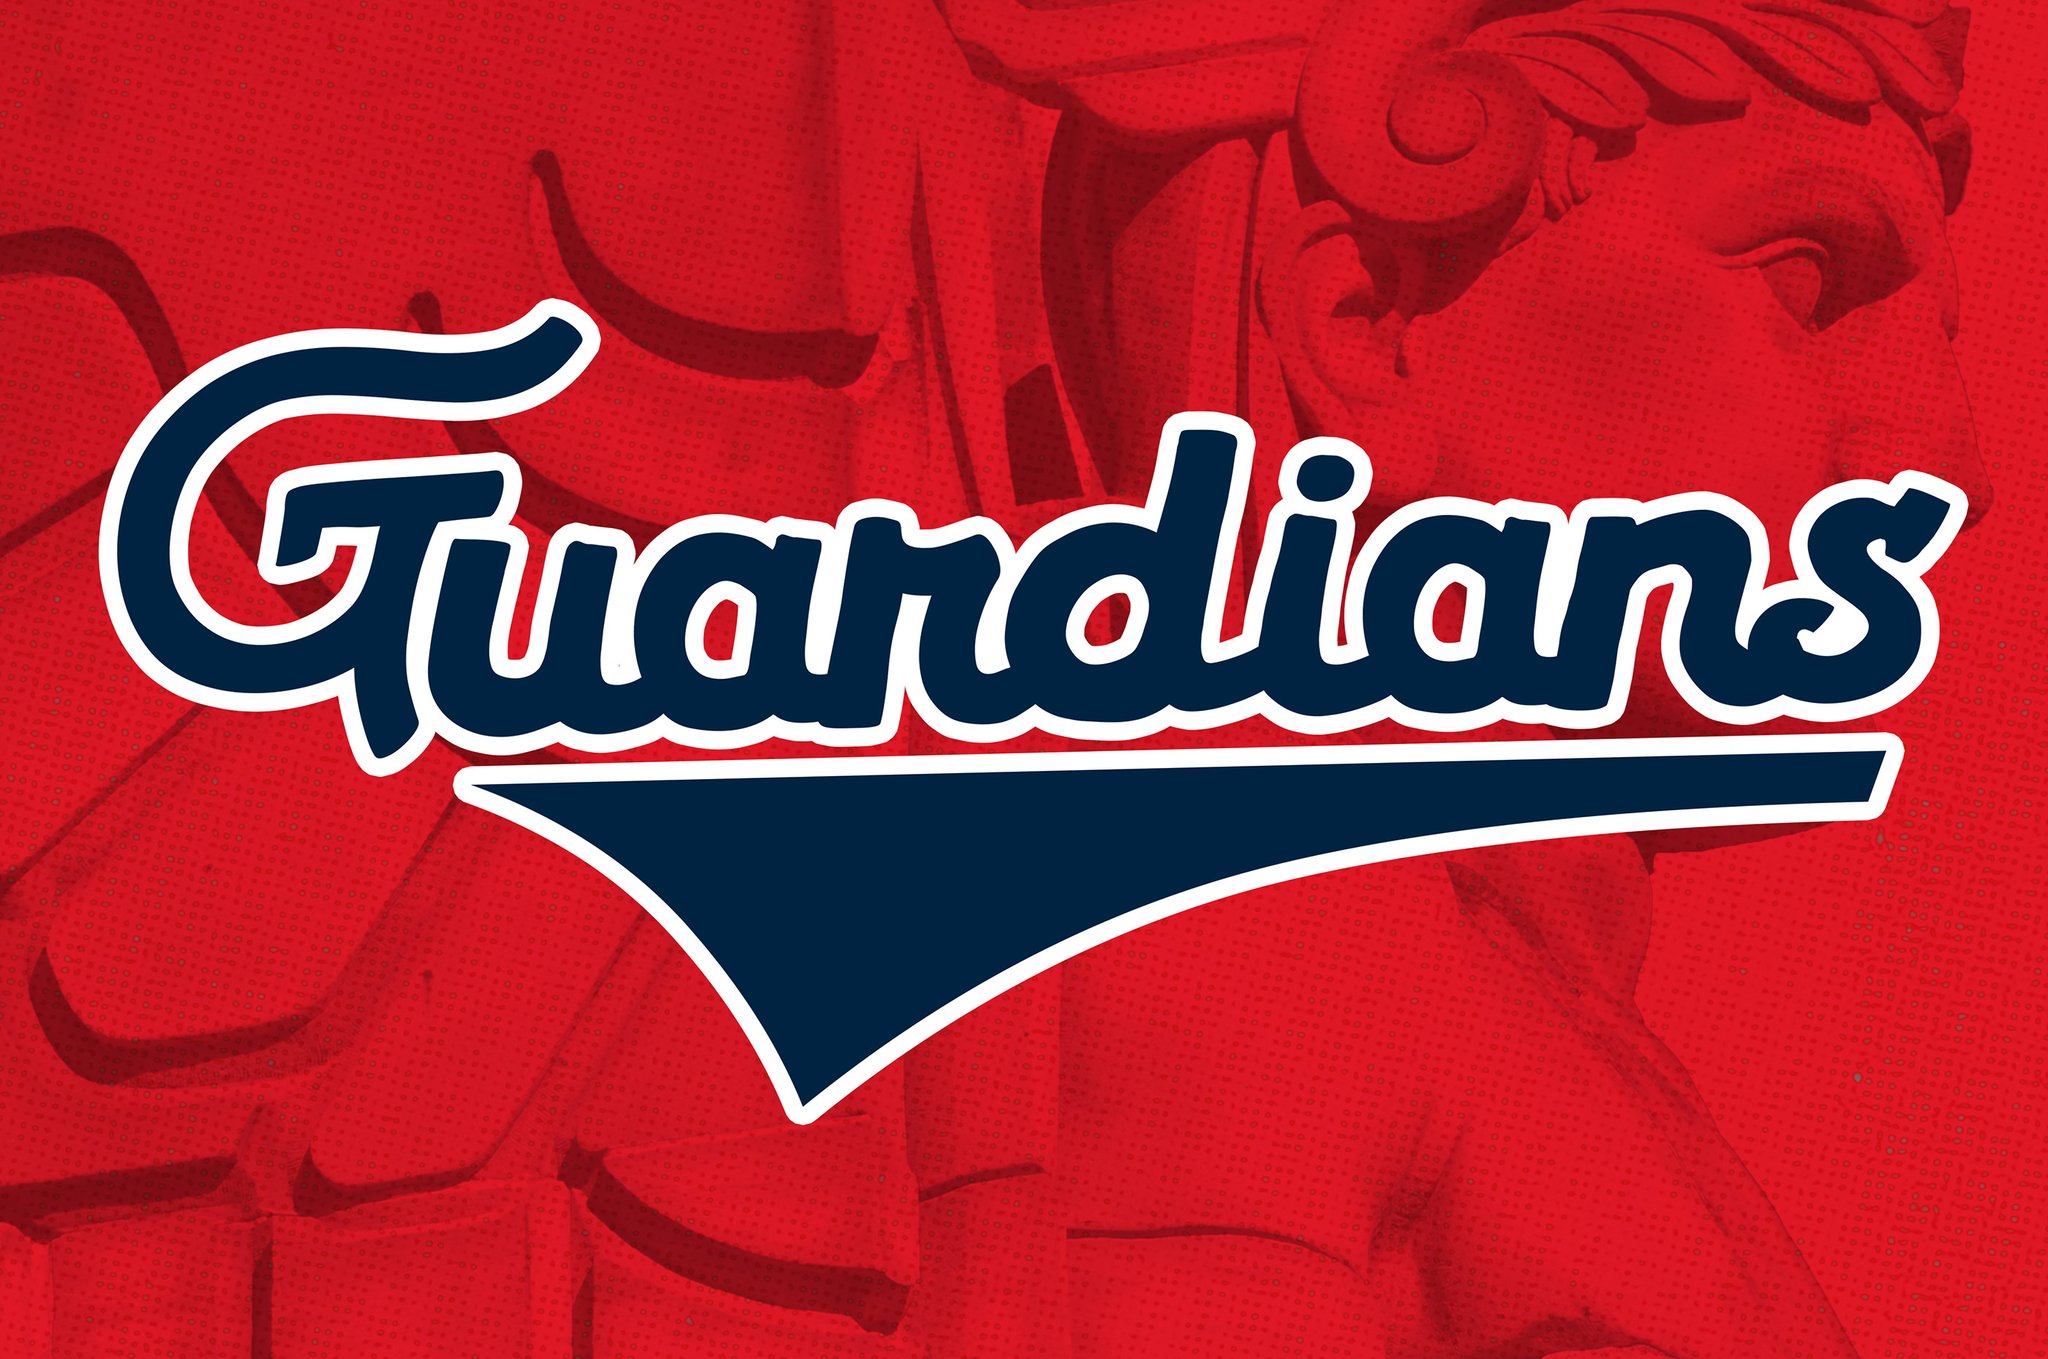 Guardians of The Land on X: 2) An easy transition Seriously, just change  the script Indians to Guardians and make a new secondary logo. Keep the  team colors, keep Block C, keep